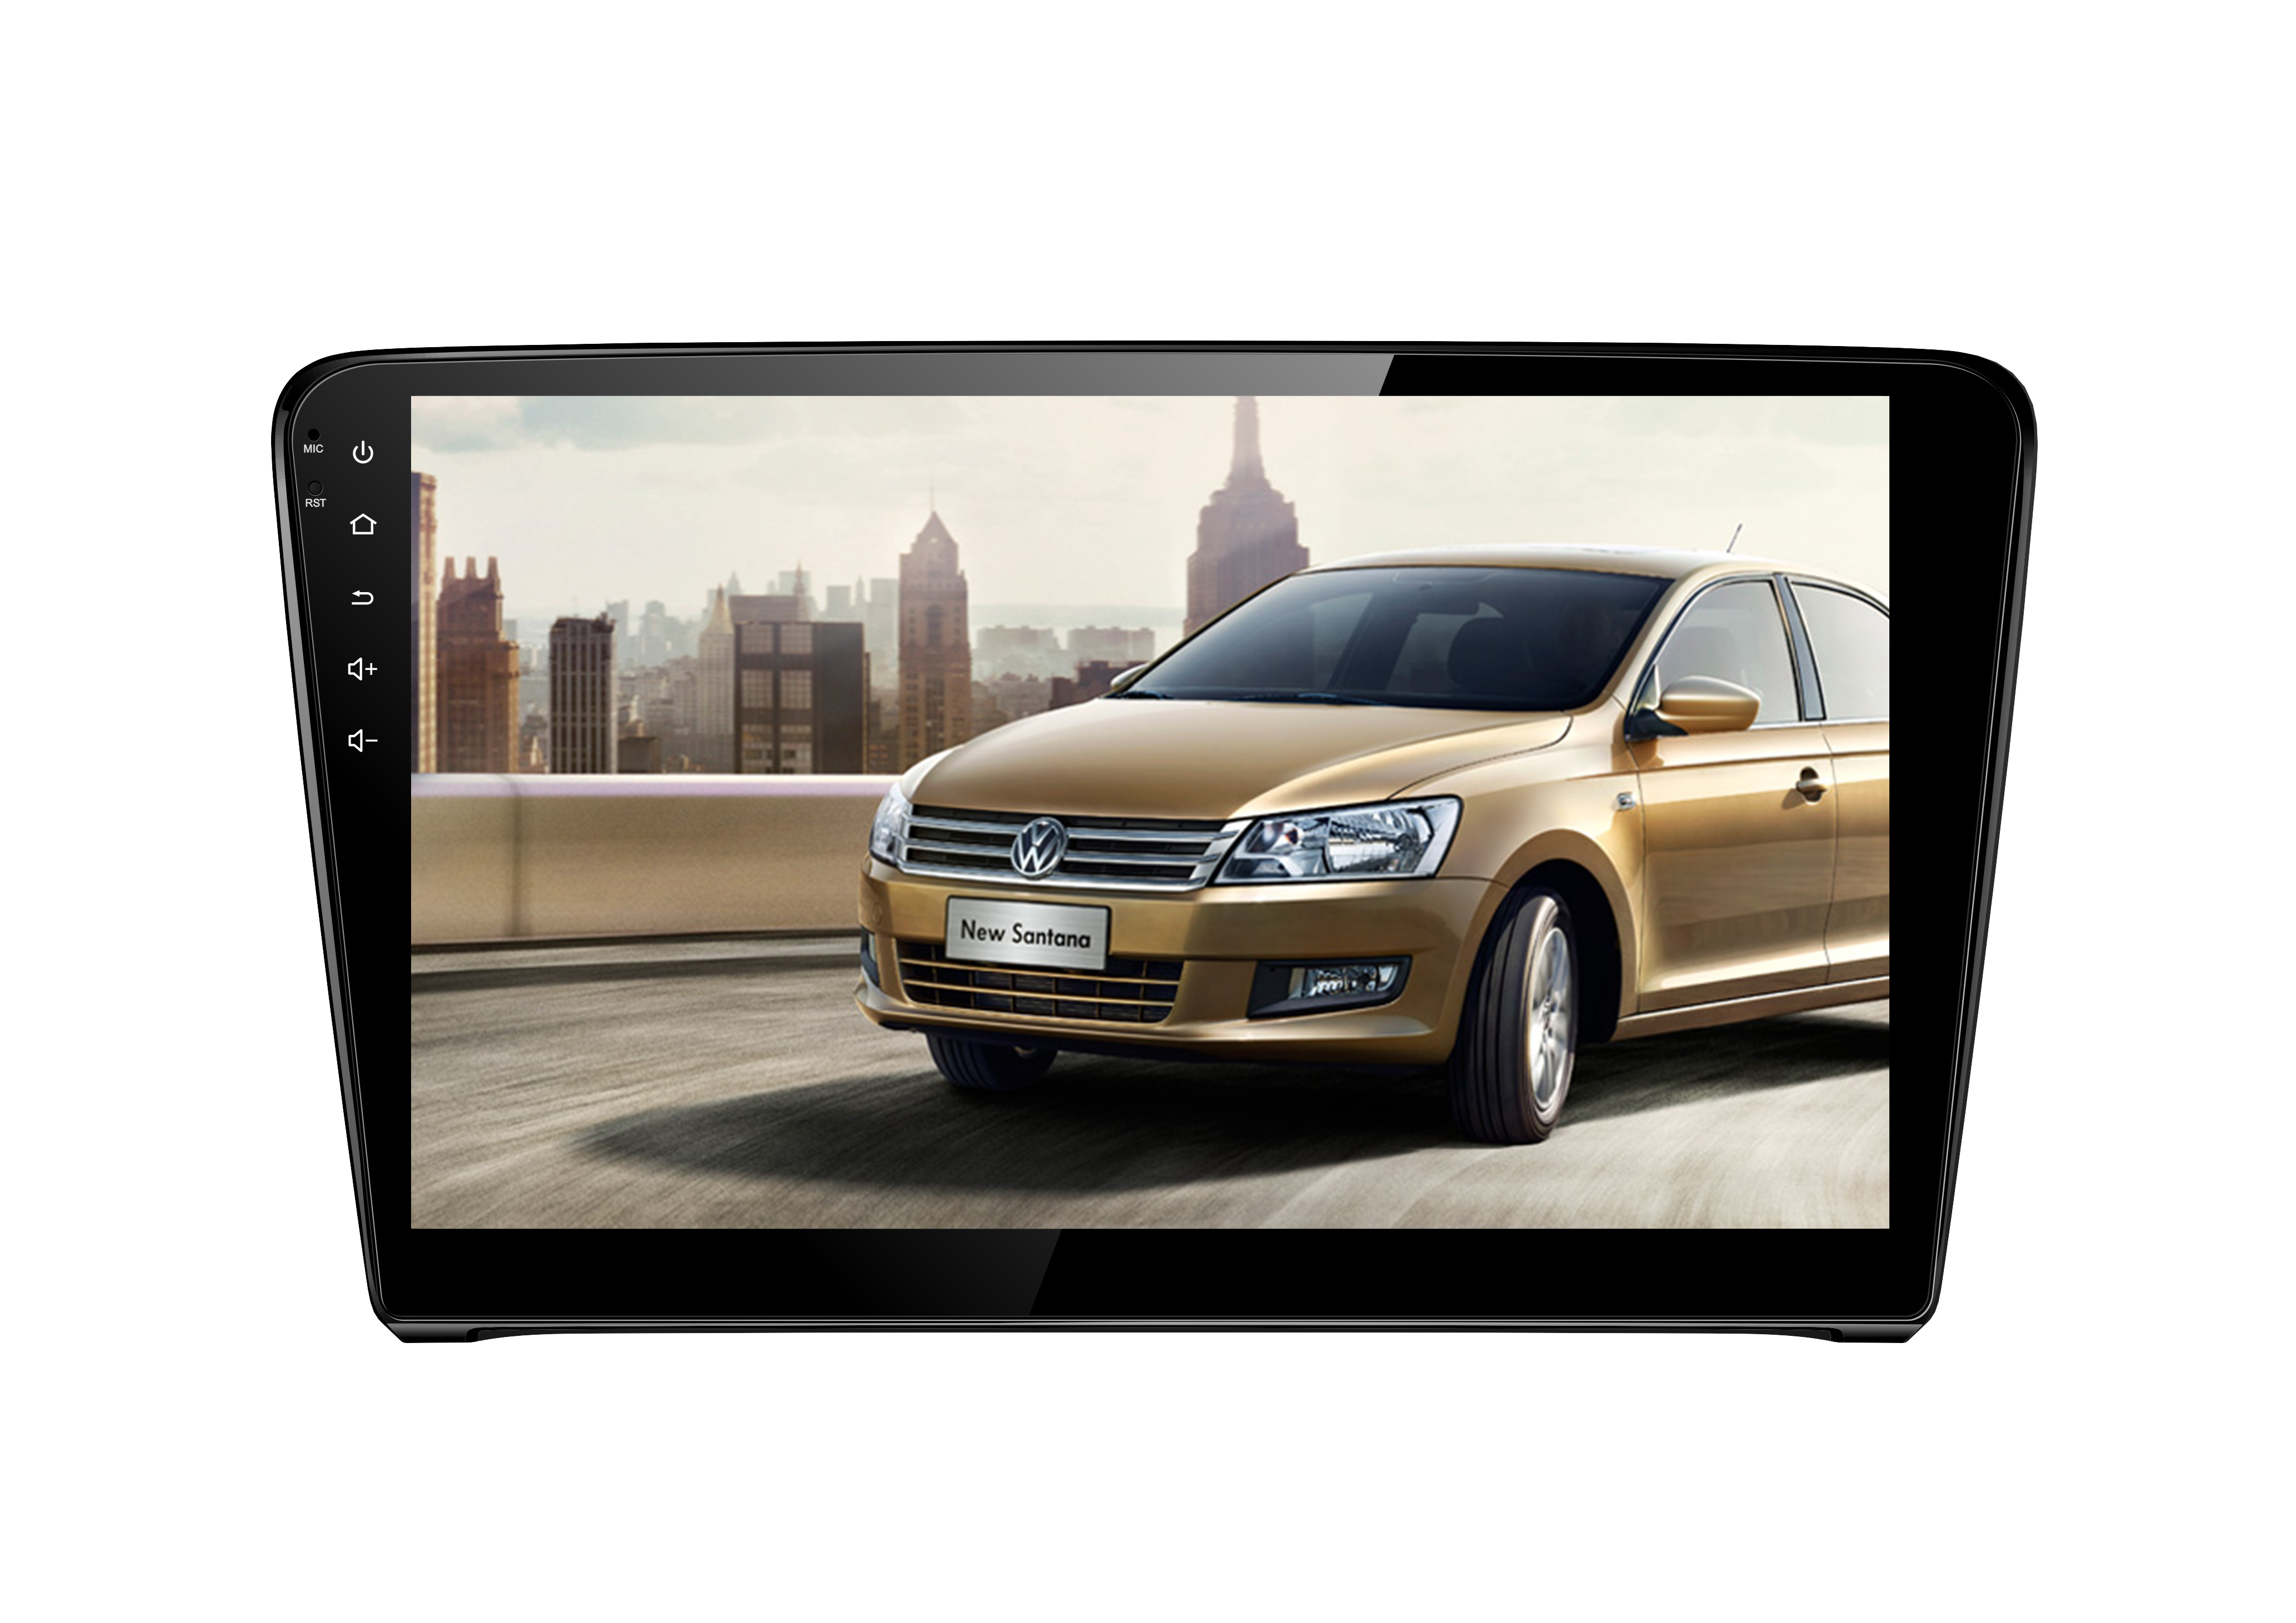 VW SANTANA 2013 10.1'' Capacitive Touch Screen Car Pad Android 7.1/6.0 FM AM Radio Auto GPS navi BT Wifi Mirror link Quad/Eight Cores Multi-Languages Video in/out